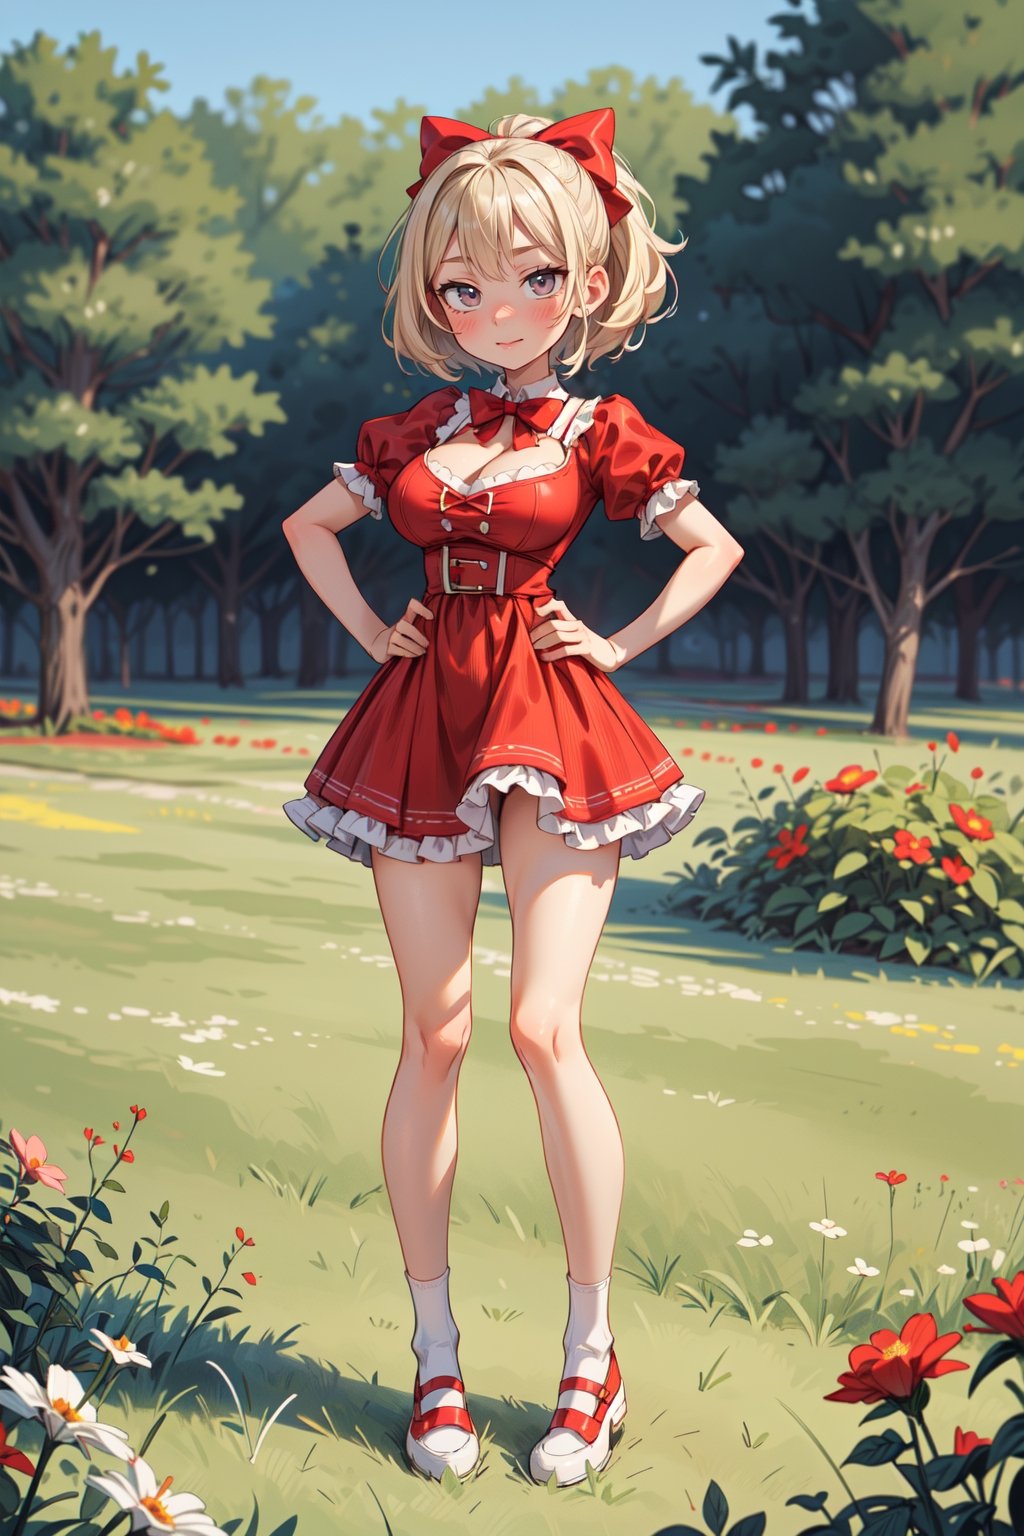 best quality, cute face, 1girl, innocent,,, (Long legs), perfect hand anatomy, short blonde hair, red bow in hair, red summer dress with ruffles, short dress, cute face, (beautiful legs, thighs), big breasts, lace stockings with ruffles, bright white shoes, (big breasts, turgid breasts), (full body, standing, front), hands on hips, in a field, flowers, grass,